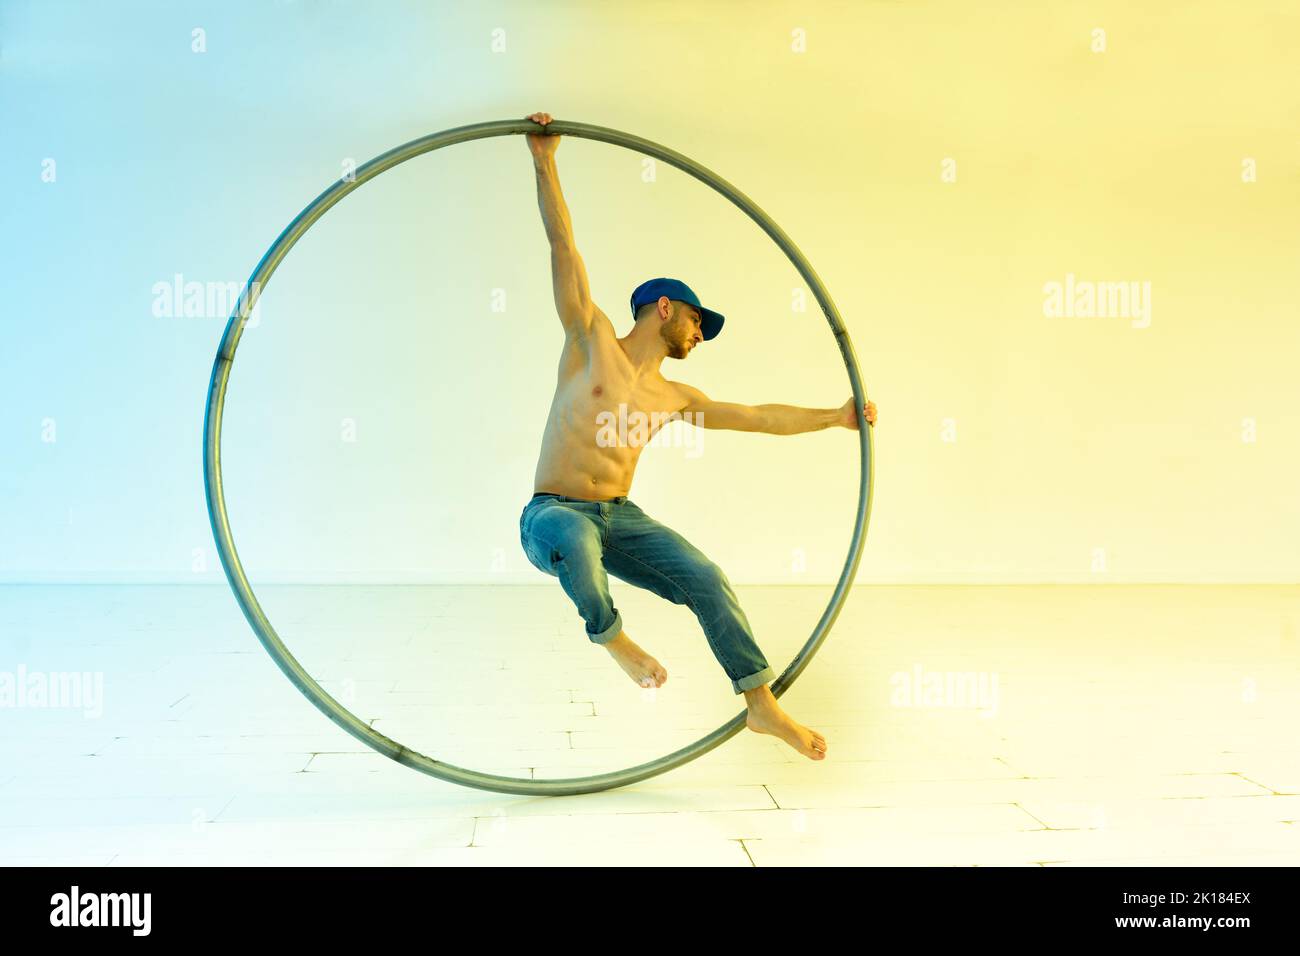 Full body of shirtless barefoot male acrobat performing stunt with cyr wheel during training against light background in modern studio Stock Photo